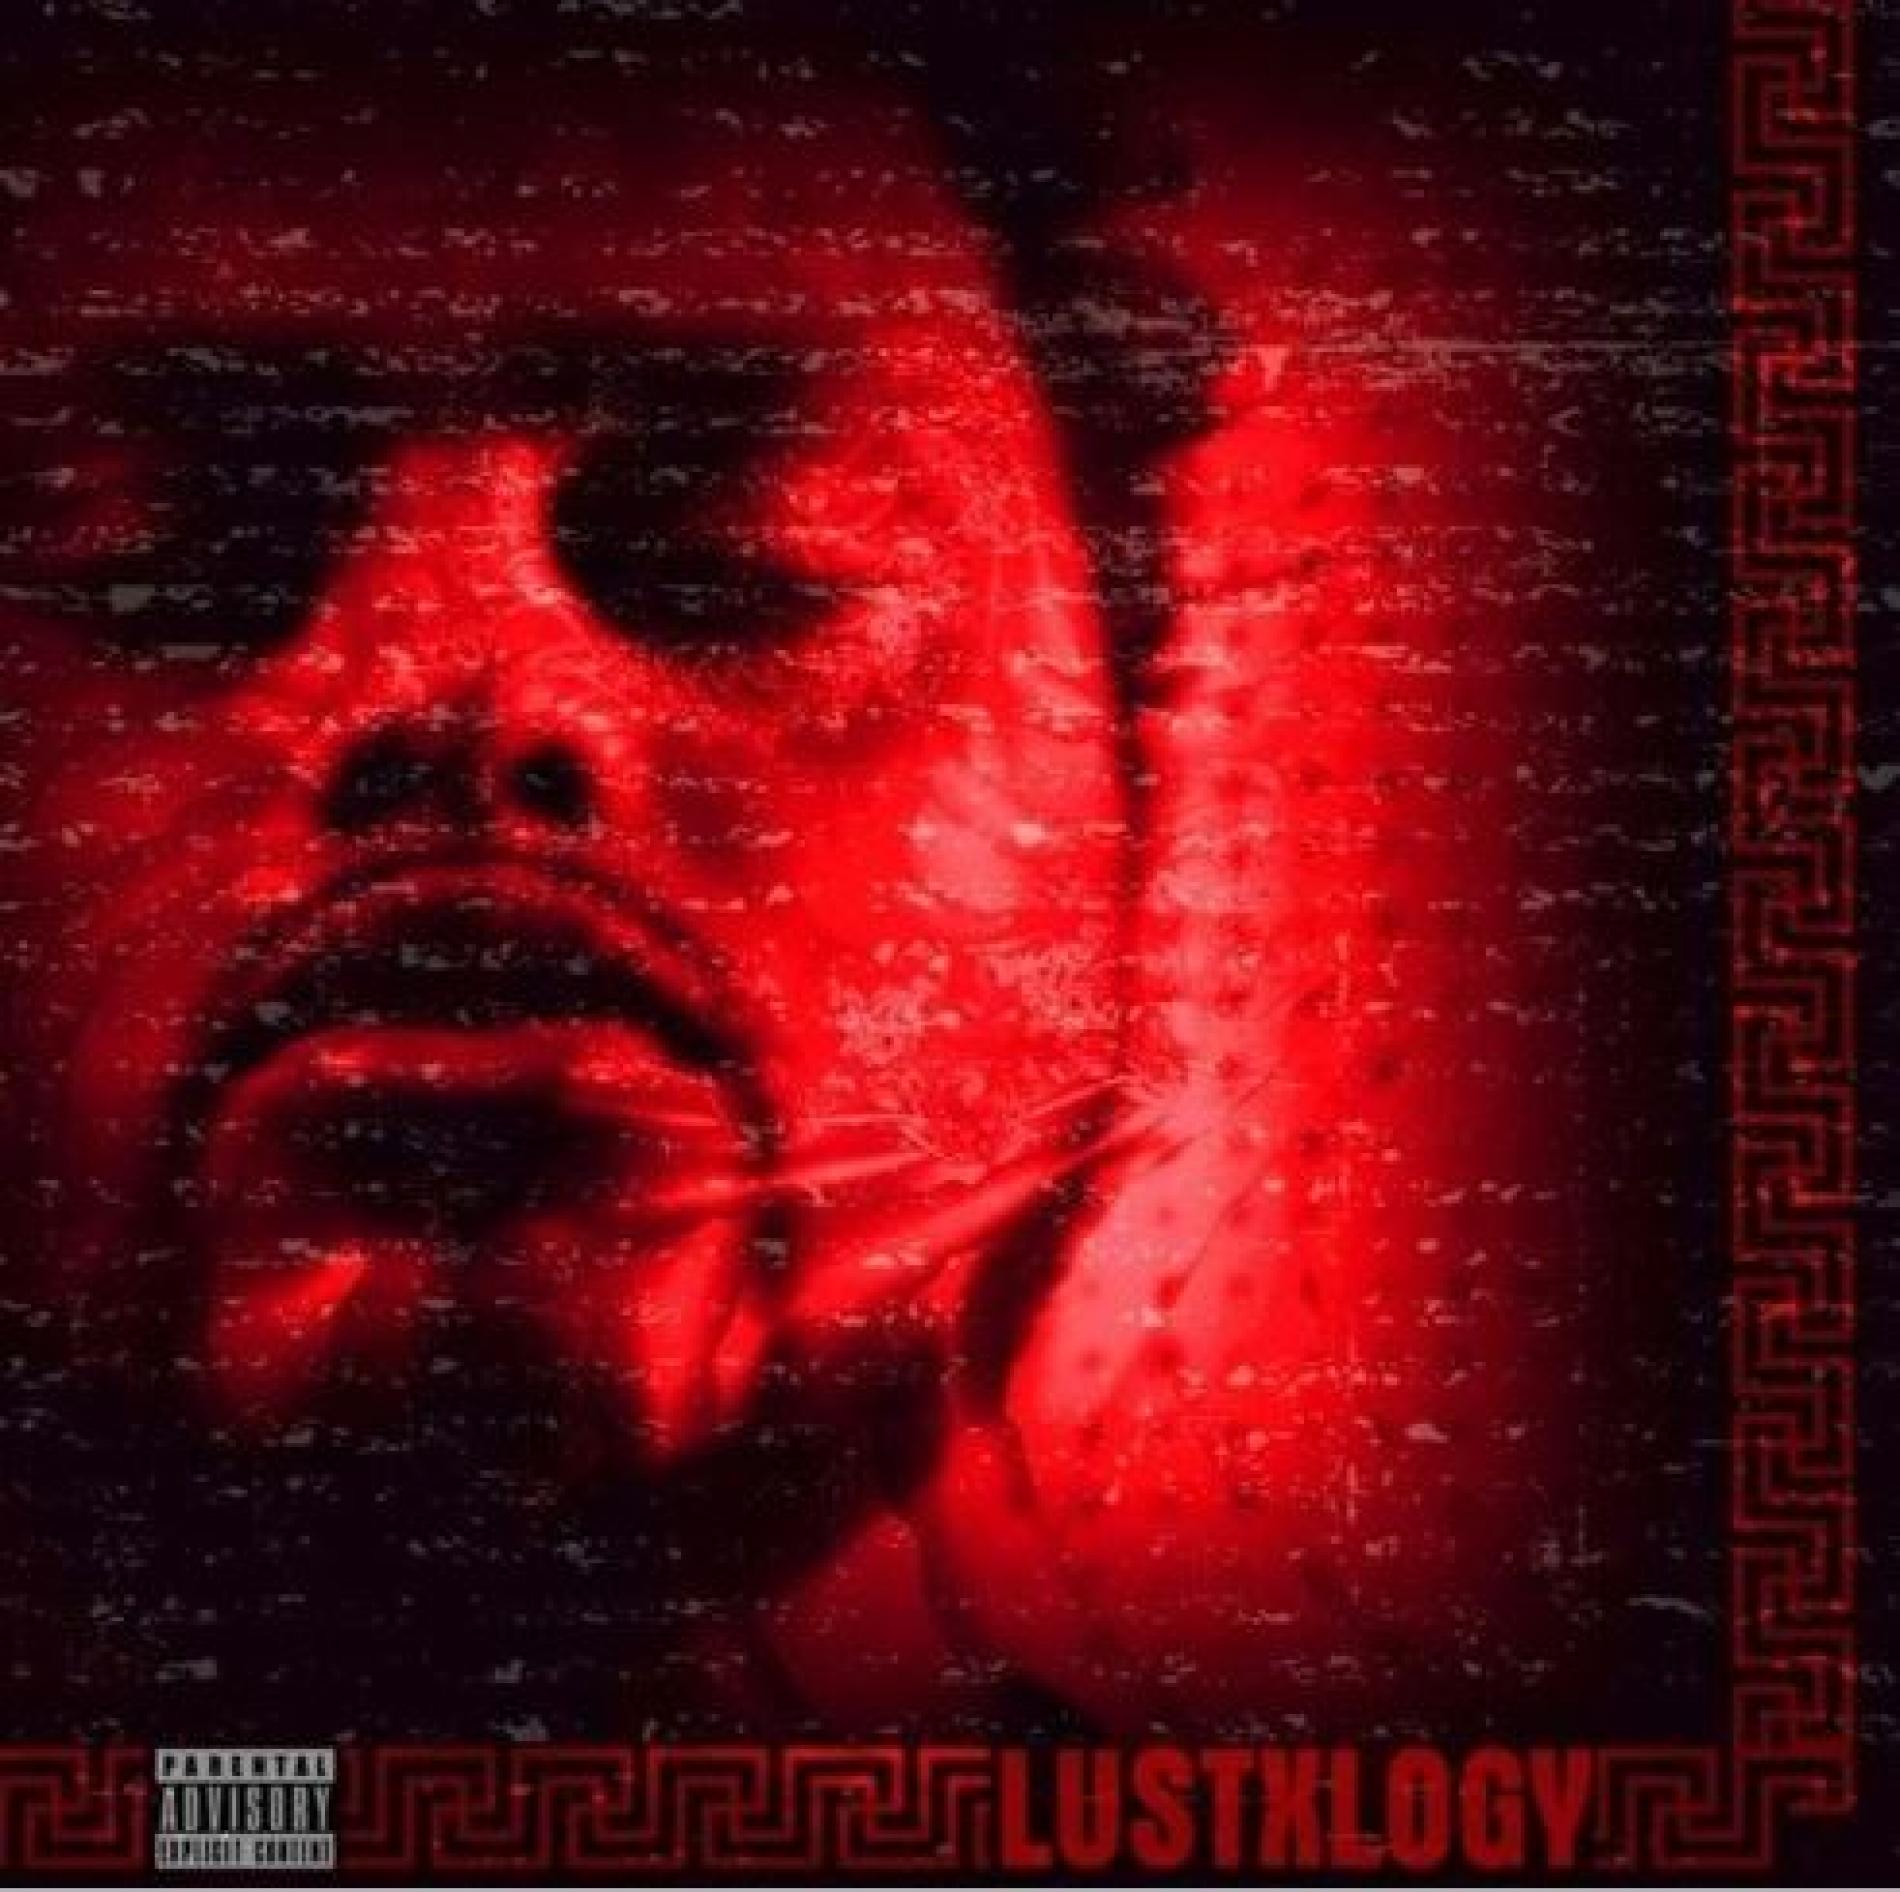 TheCommonUnknown – Lustxlogy EP